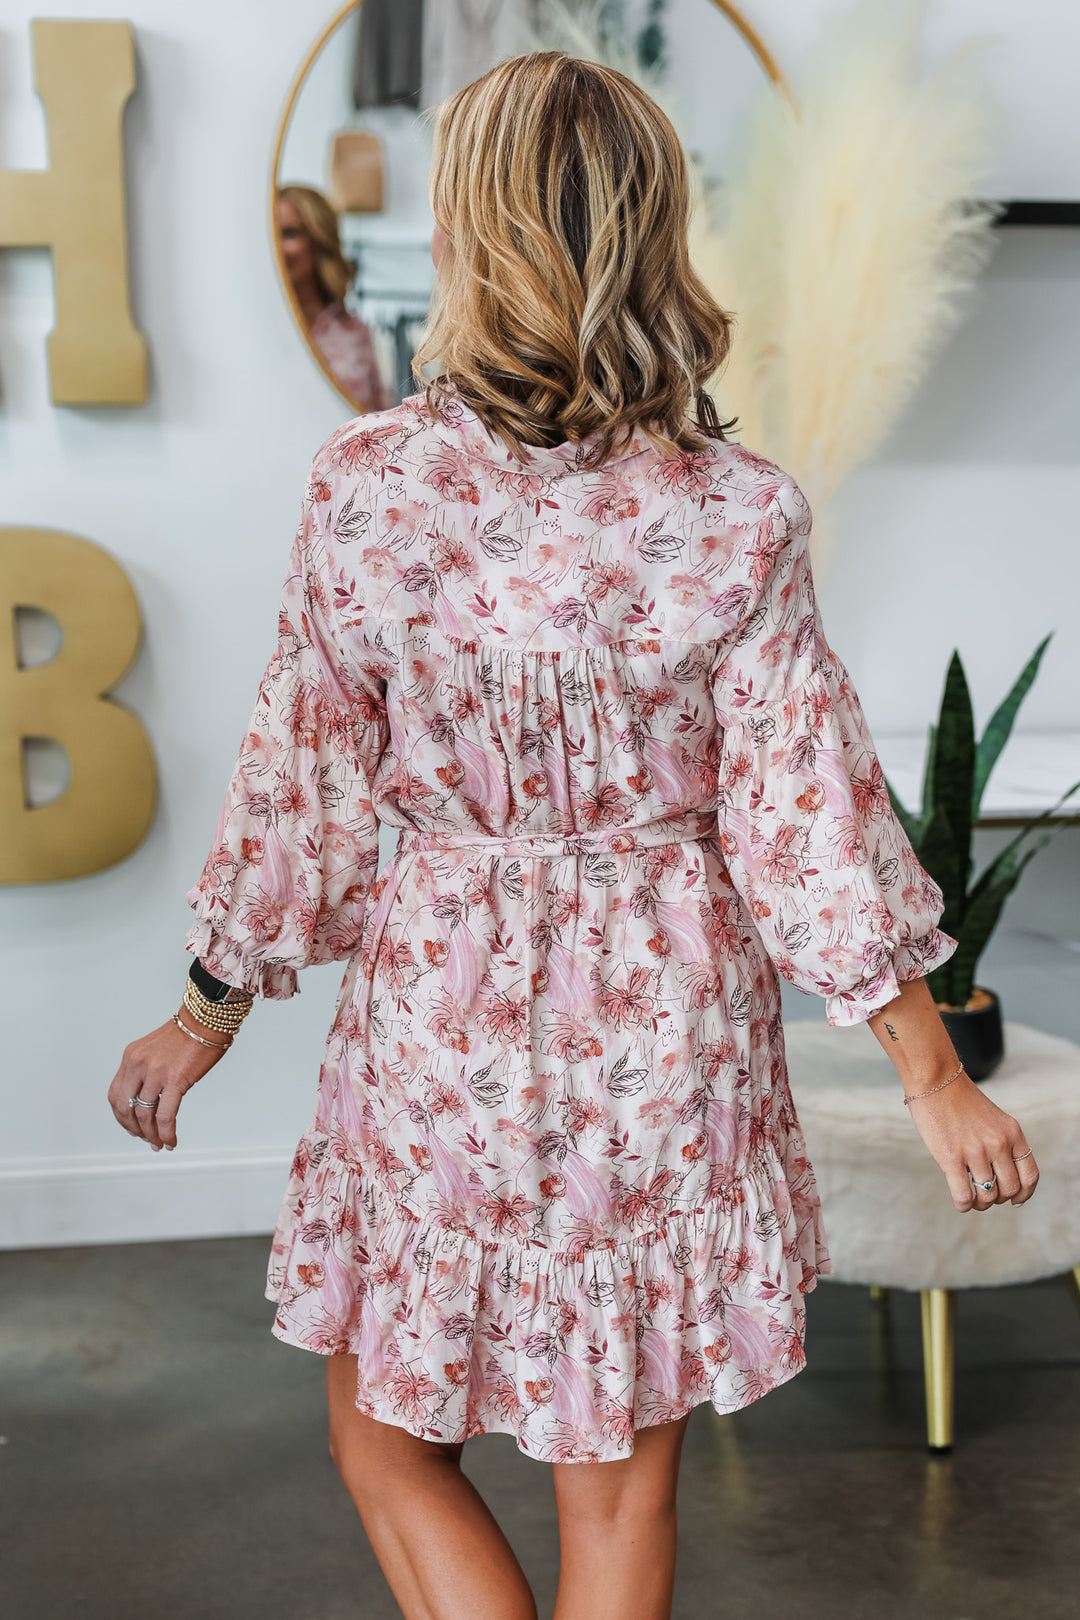 A blonde woman standing in a shop wearing a pink bubble sleeve floral shirt dress with adjustable tie belt.